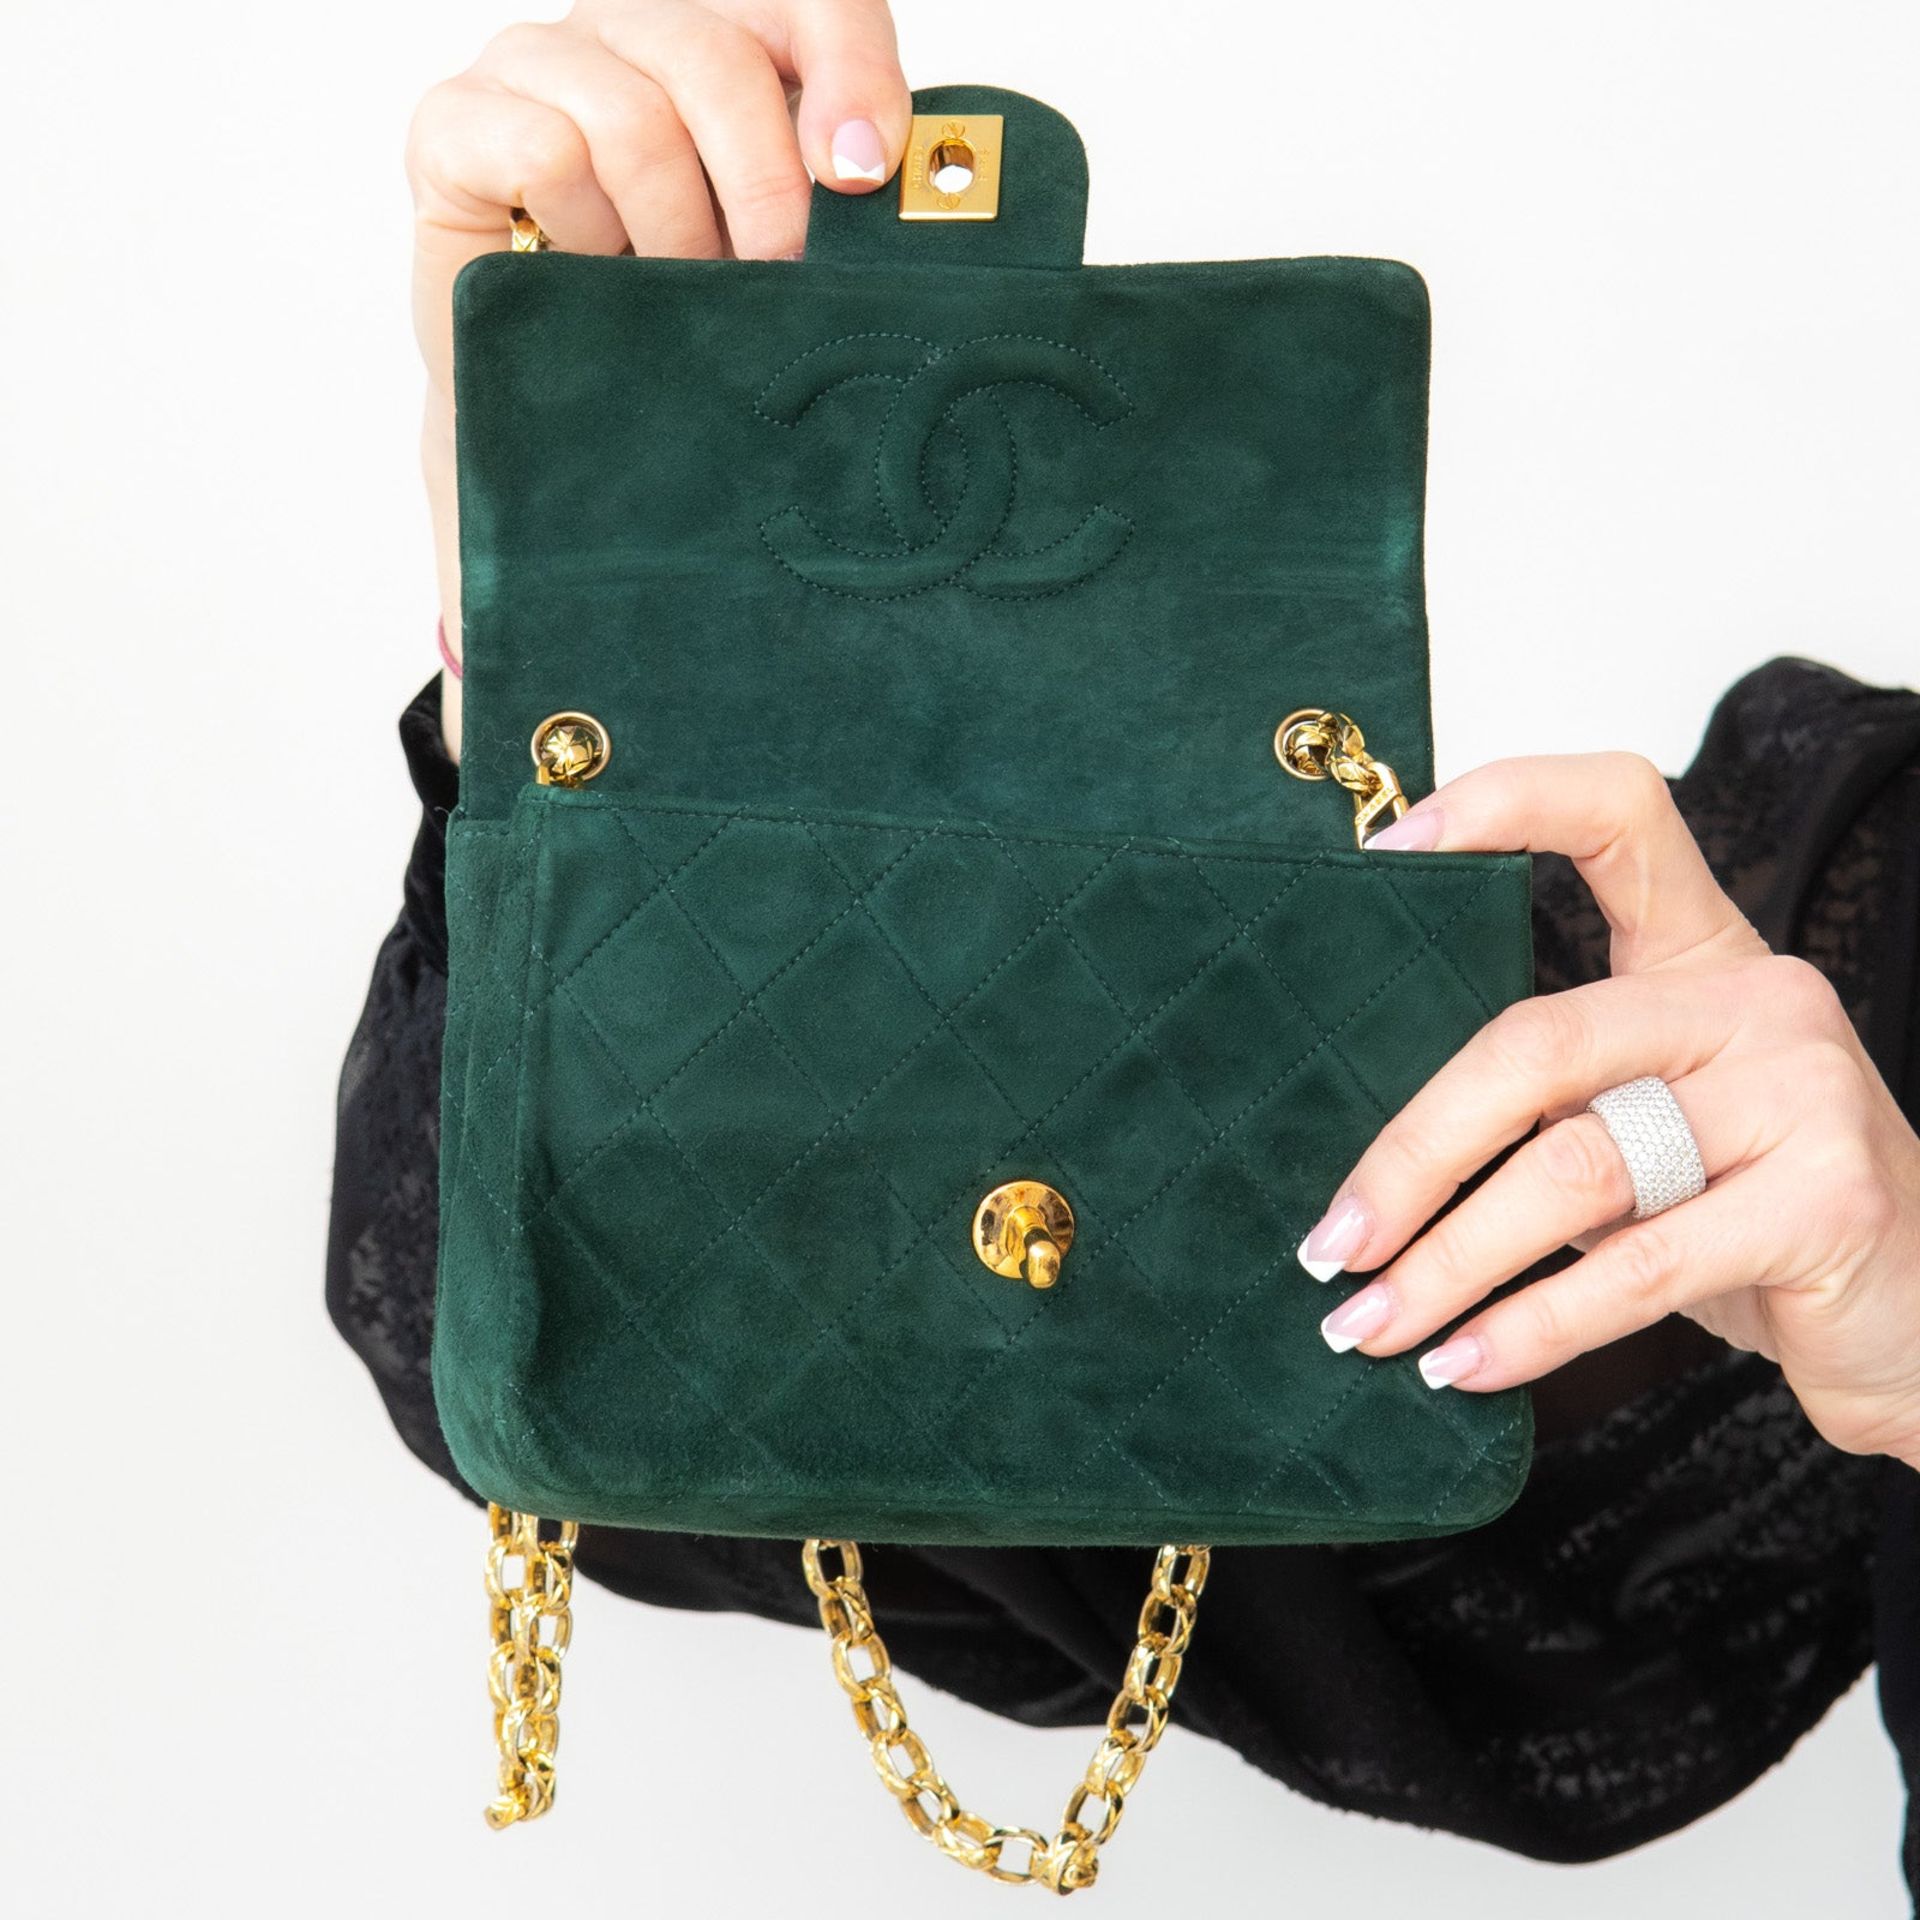 Chanel Vintage Green Mini Square Suede Flap Bag - Image 8 of 16